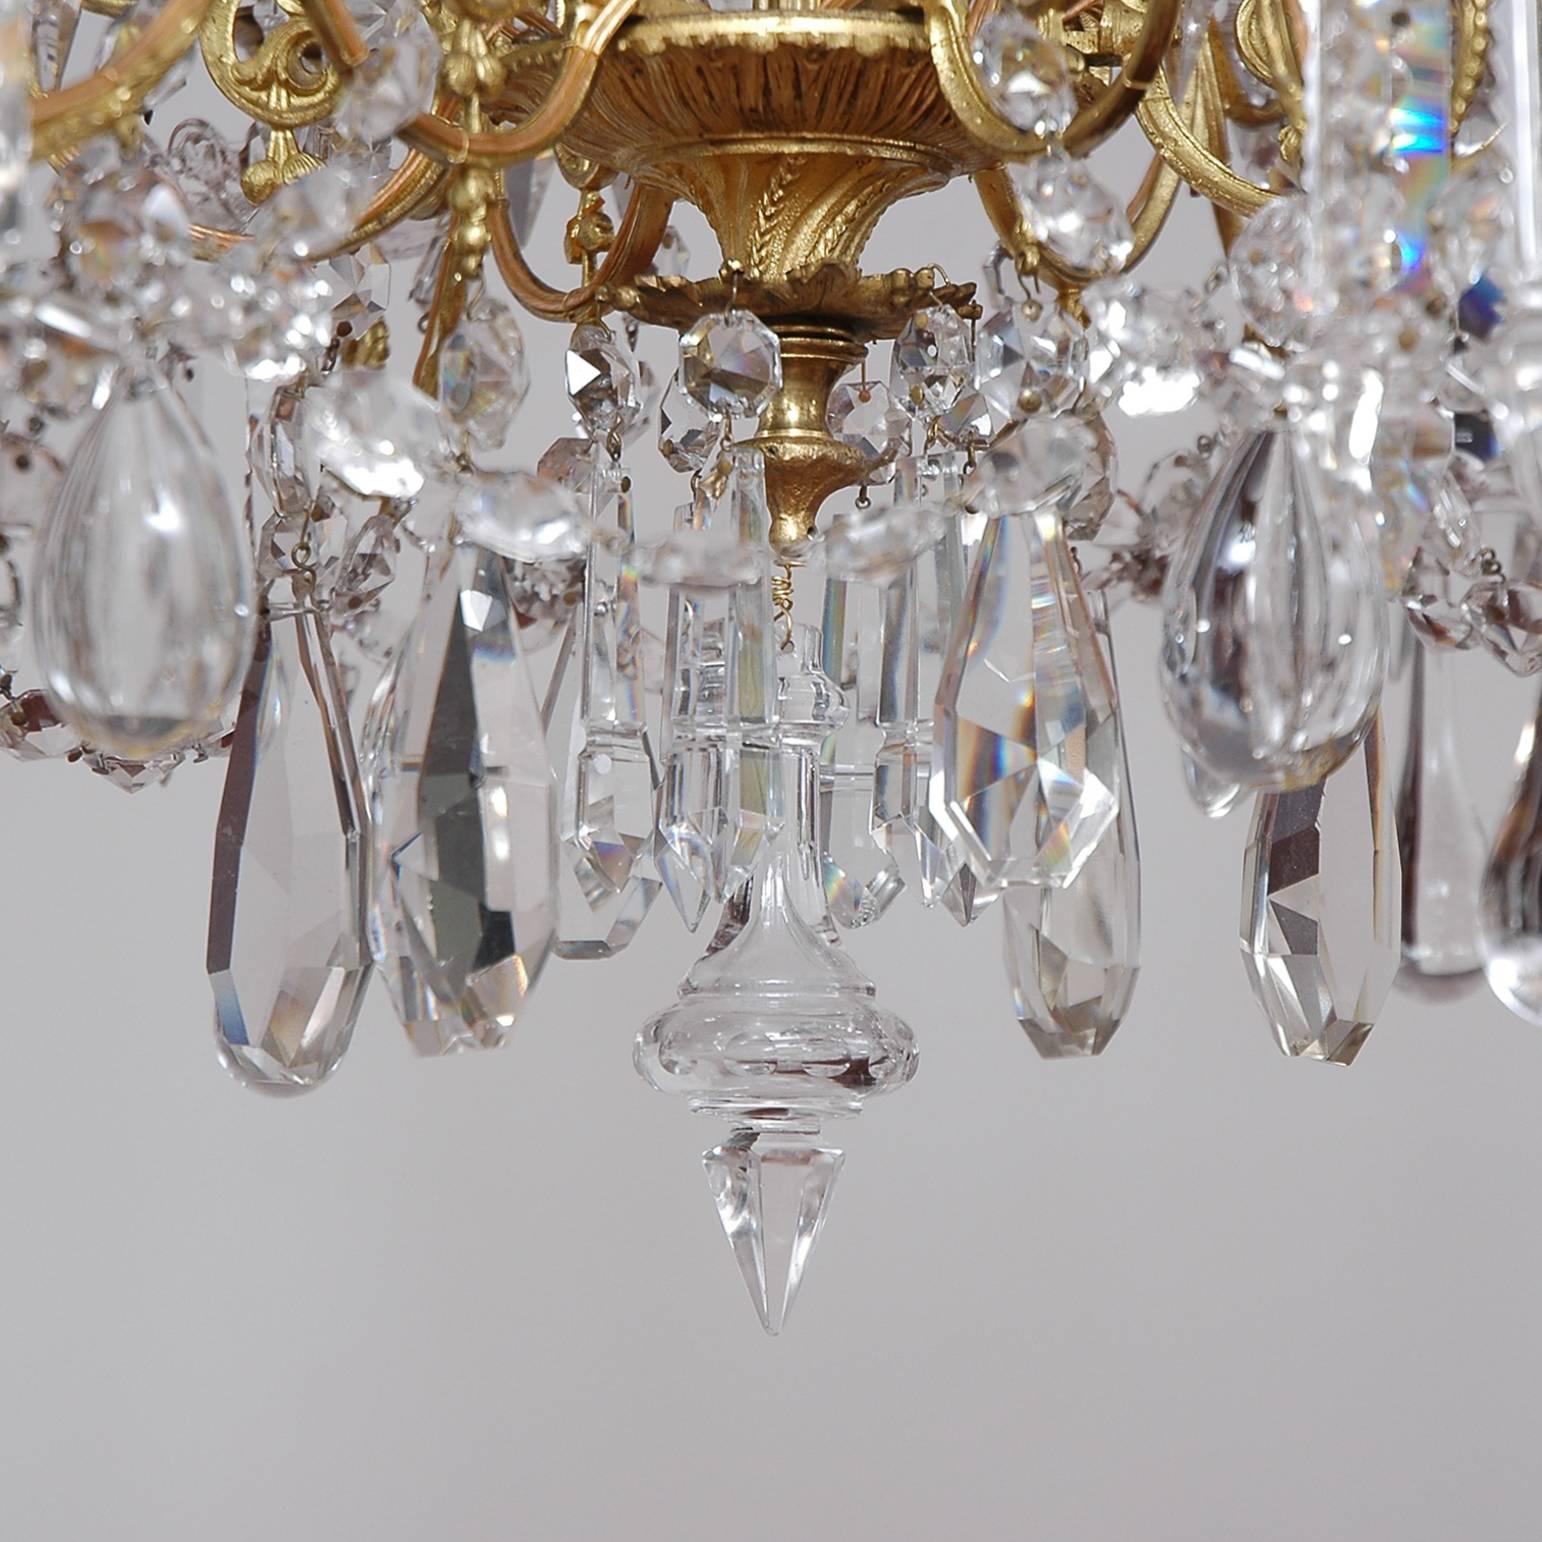 Neoclassical Revival Scandinavian Cut-Glass and Crystal Chandelier with Twelve Lights, circa 1880 For Sale